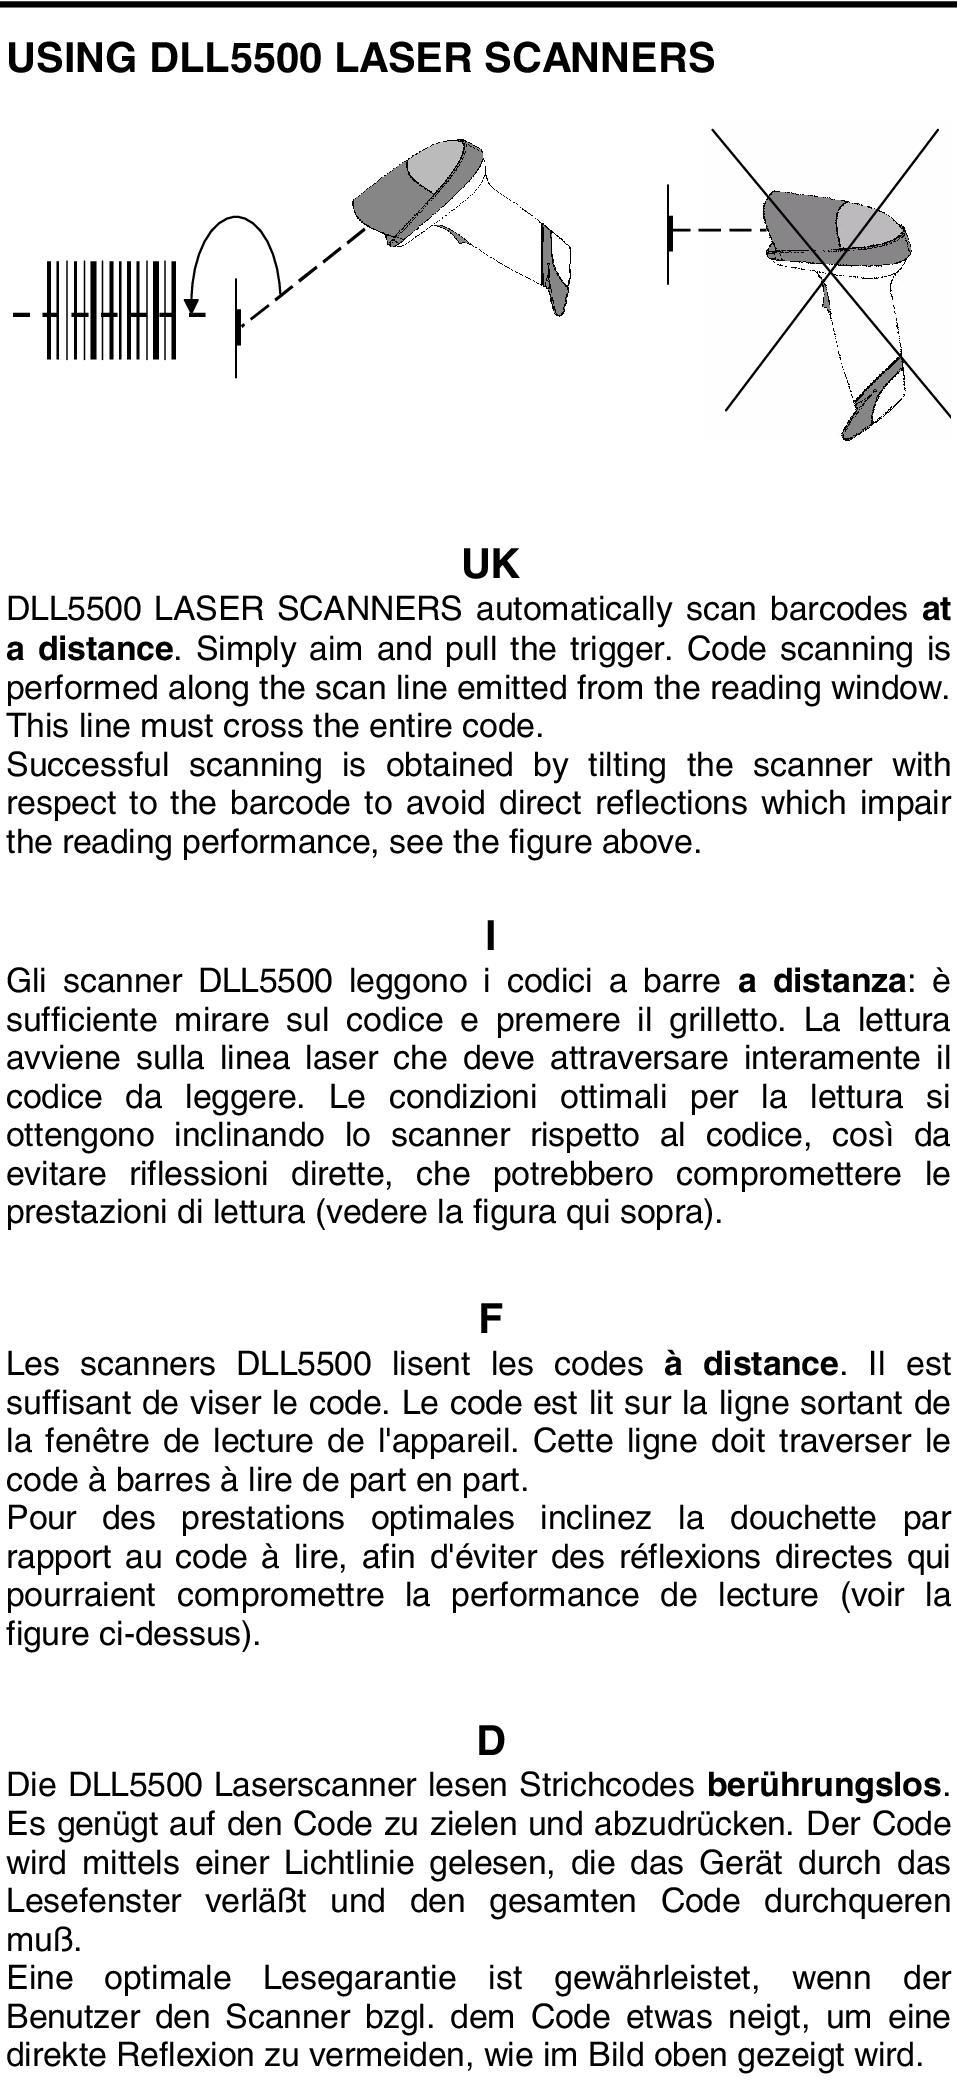 Successful scanning is obtained by tilting the scanner with respect to the barcode to avoid direct reflections which impair the reading performance, see the figure above.